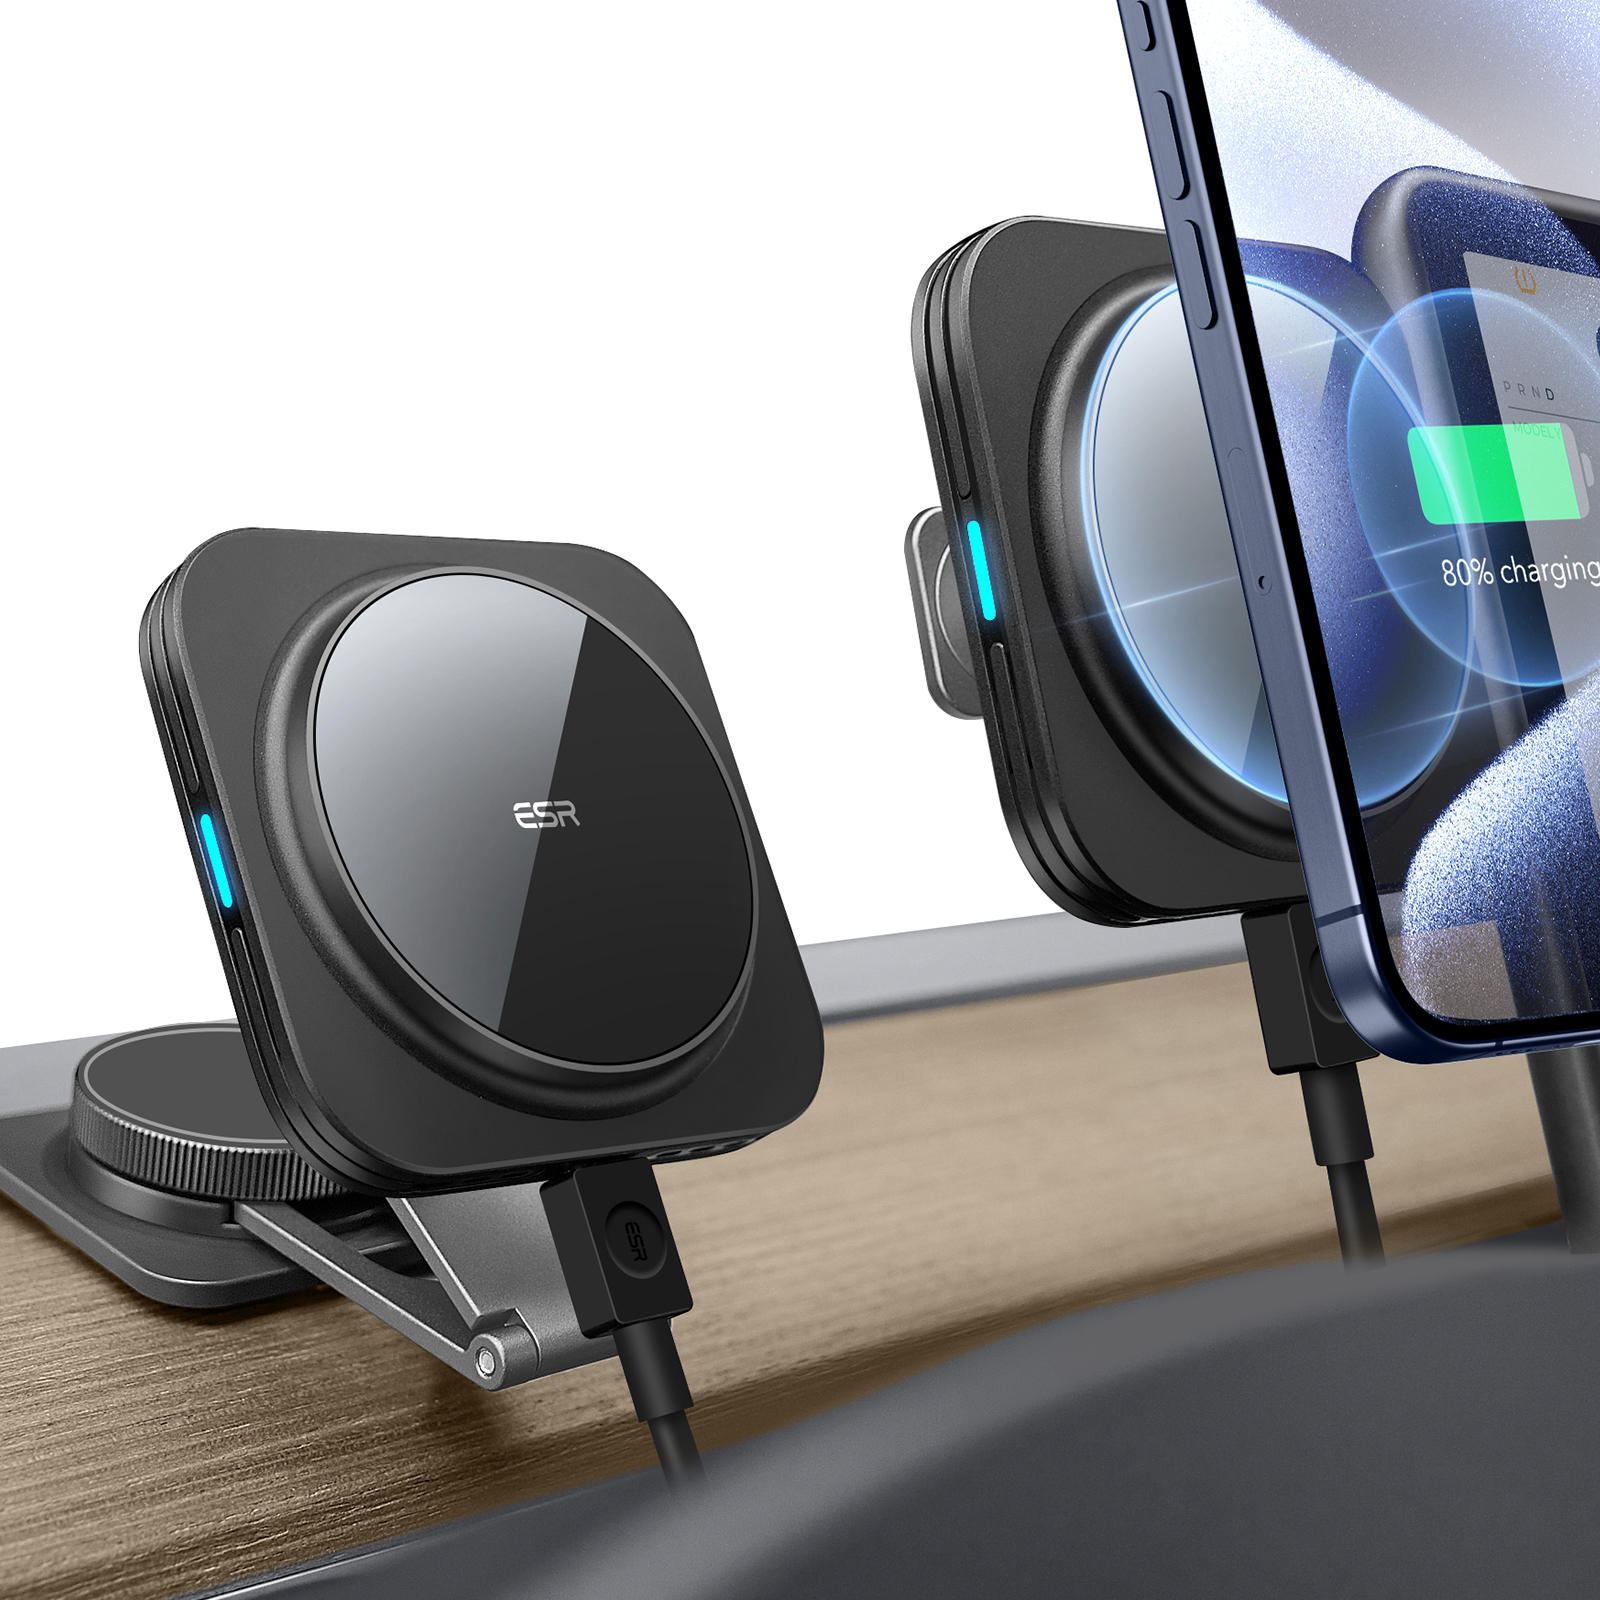 ESR HaloLock Magnetic Magsafe Wireless Car Charger Dock for iPhone